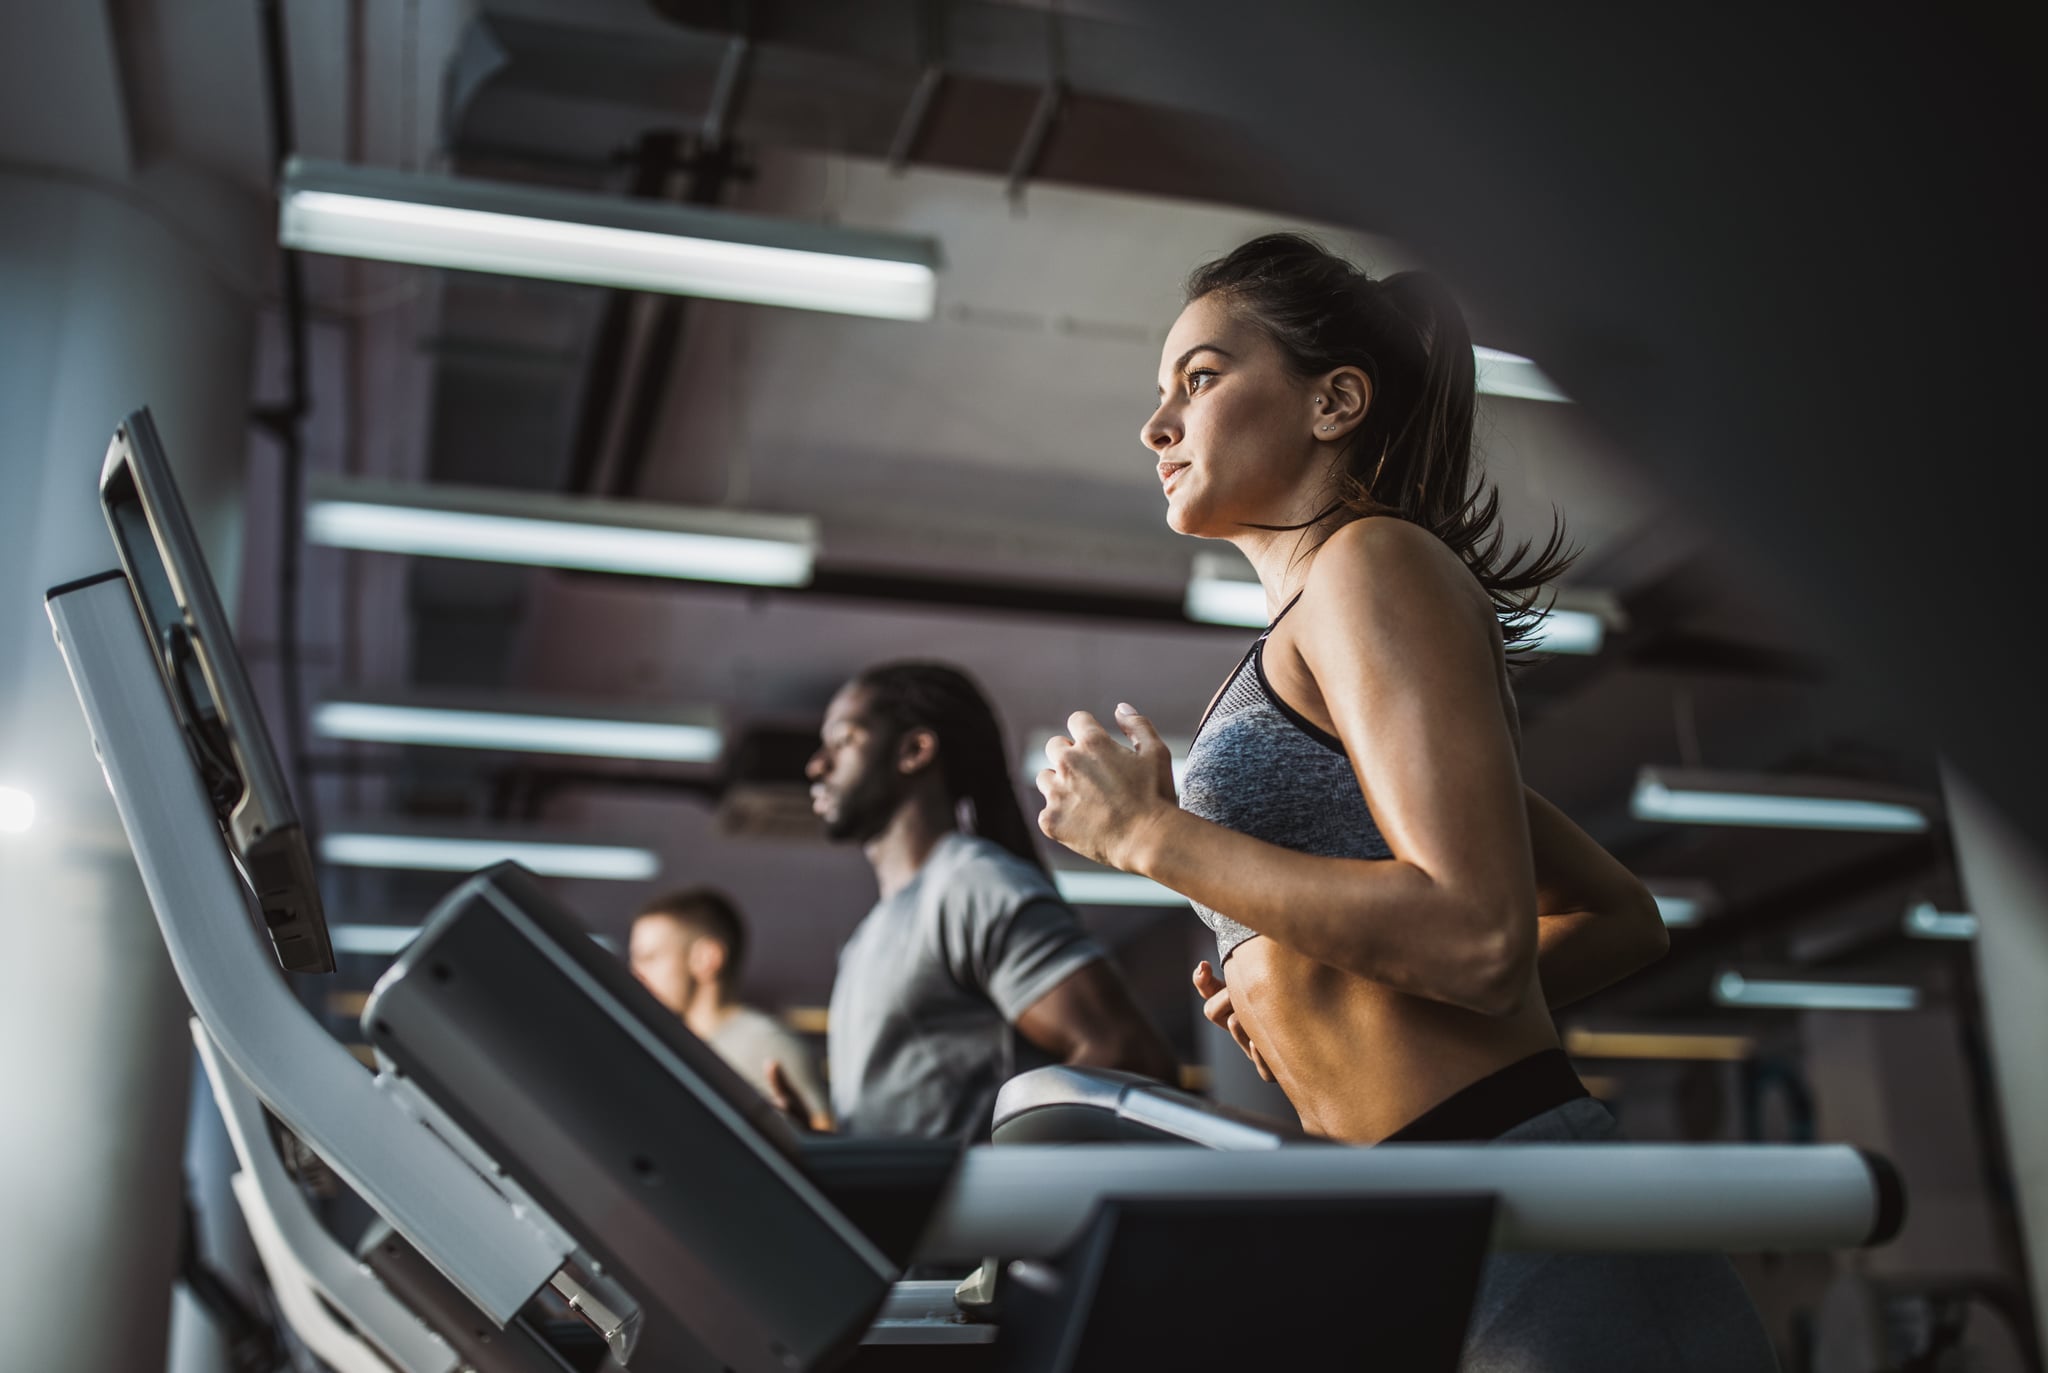 <p>Now that your body is getting accustomed to cardio, it's time to up the intensity with a 26-minute rolling hills treadmill circuit that mixes incline with speed.</p> <ul> <li><strong>5 minutes:</strong> 3.3 speed at 5 percent incline</li> <li><strong>2 minutes:</strong> 3.6 speed at 7 percent incline</li> <li><strong>1.5 minutes:</strong> 4.5 speed at 5 percent incline</li> <li><strong>1 minute:</strong> 3.6 speed at 5 percent incline</li> <li><strong>2 minutes:</strong> 4.5 speed at 5 percent incline</li> <li><strong>1 minute:</strong> 5.5 speed at 7 percent incline</li> <li><strong>1 minute:</strong> 4.5 speed with no incline</li> <li><strong>2 minutes:</strong> 4.7 speed with no incline</li> <li><strong>1.5 minutes:</strong> 5.6 speed with no incline</li> <li><strong>1 minute:</strong> 5.0 speed at 5 percent incline</li> <li><strong>2 minutes:</strong> 4.7 speed 5 percent incline</li> <li><strong>1 minute:</strong> 4.0 speed 5 percent incline</li> <li><strong>5 minutes:</strong> 3.0 speed with no incline</li> </ul>